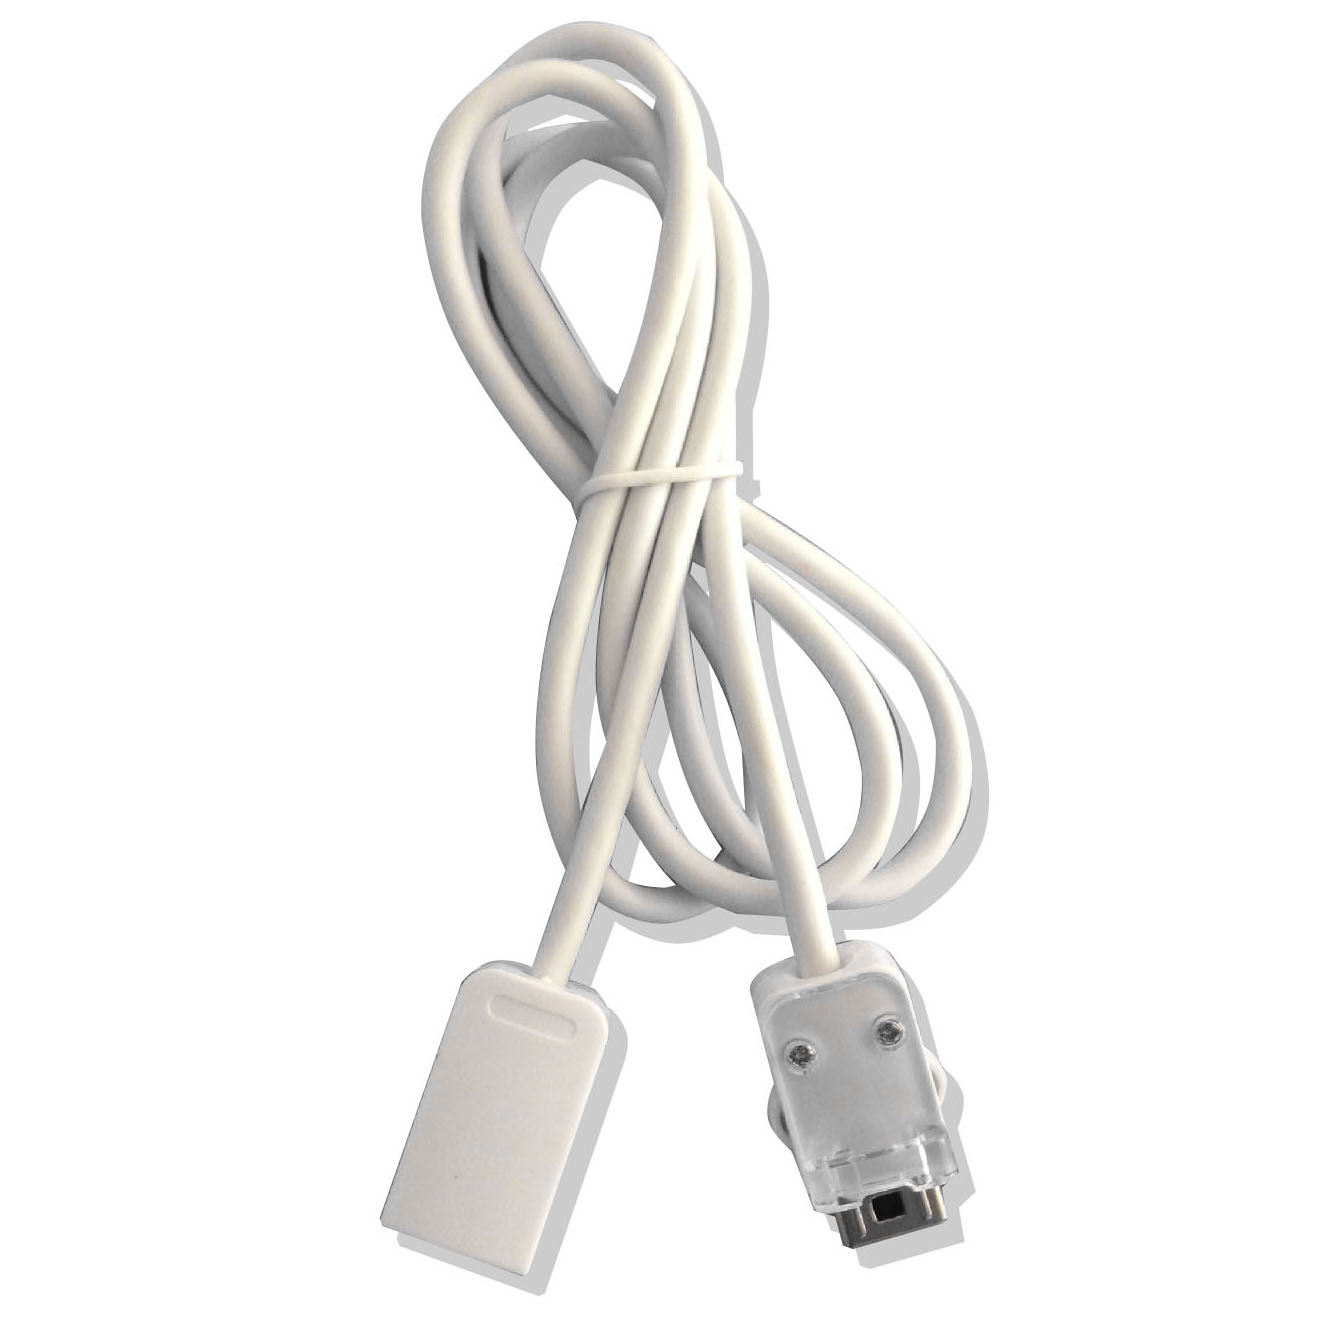 how to setup usb to ethernet connection on wii u